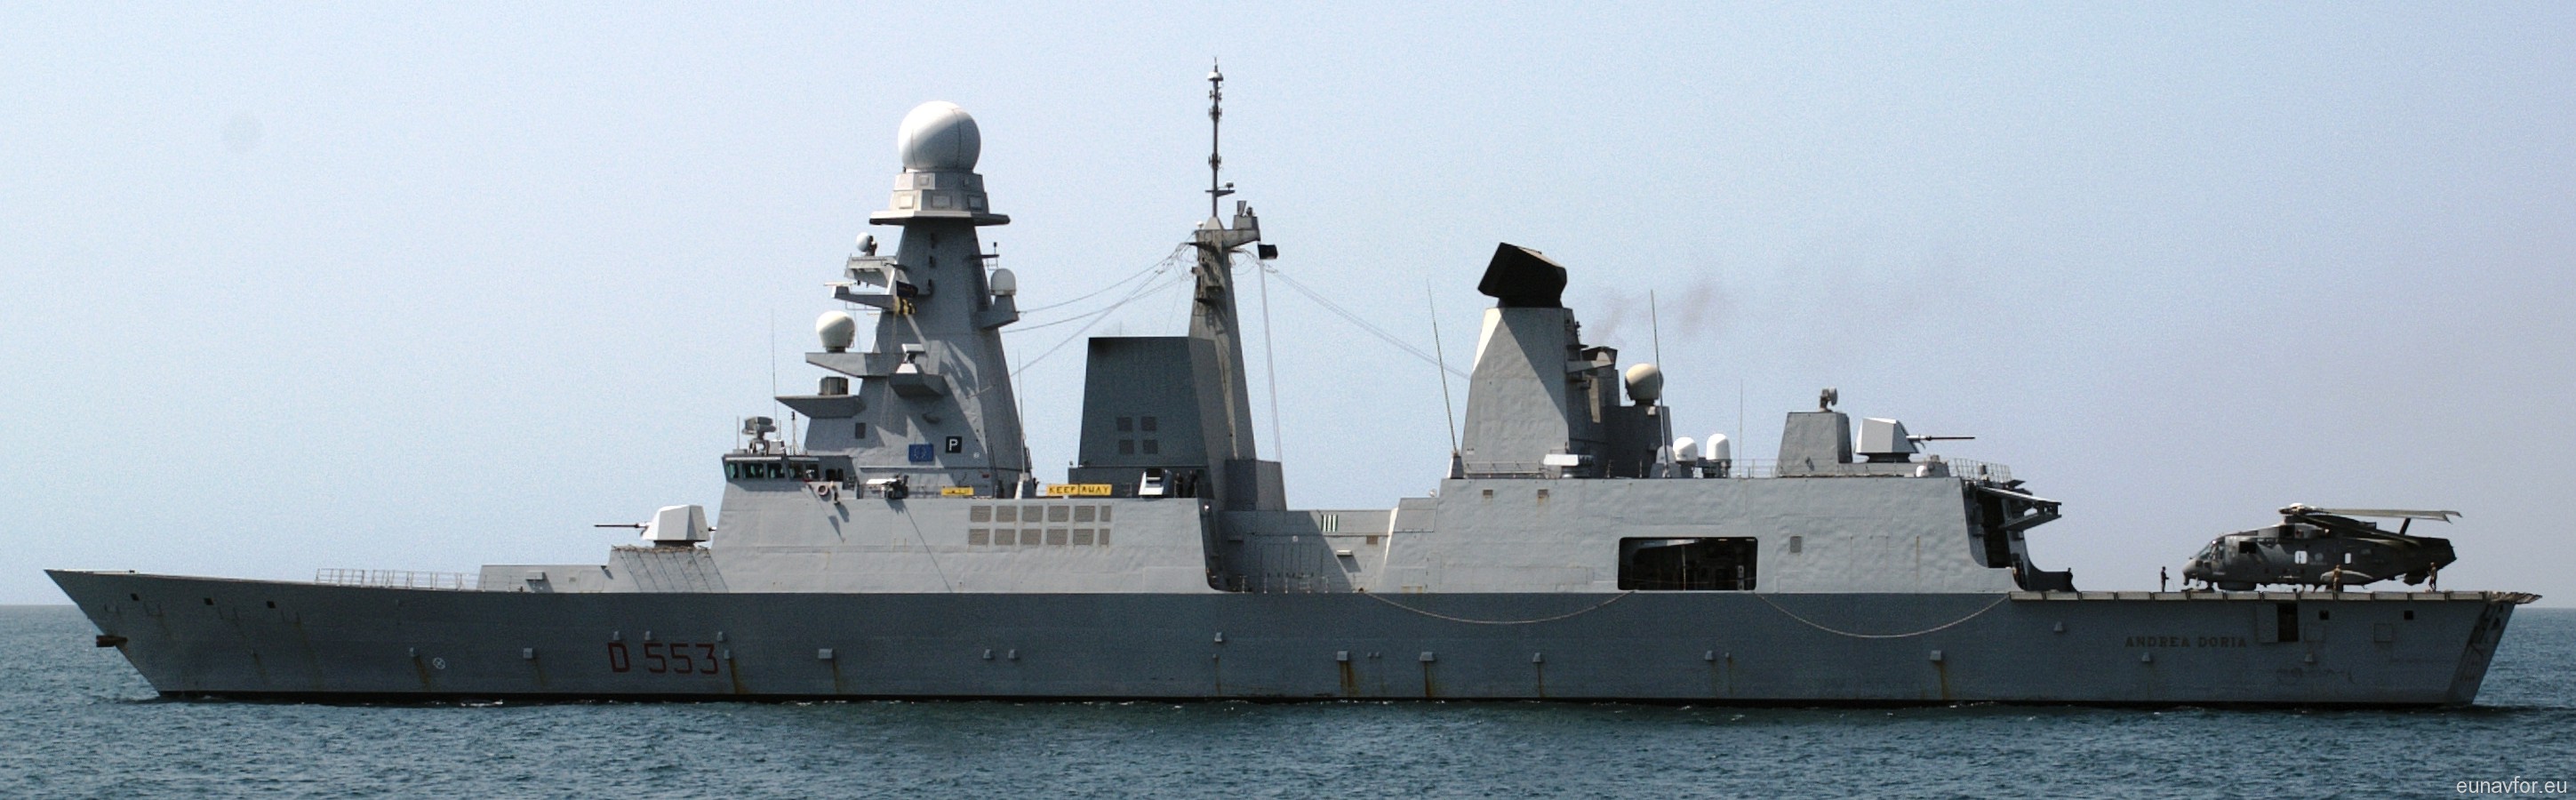 d-553 its andrea doria guided missile destroyer ddgh horizon class italian navy 04